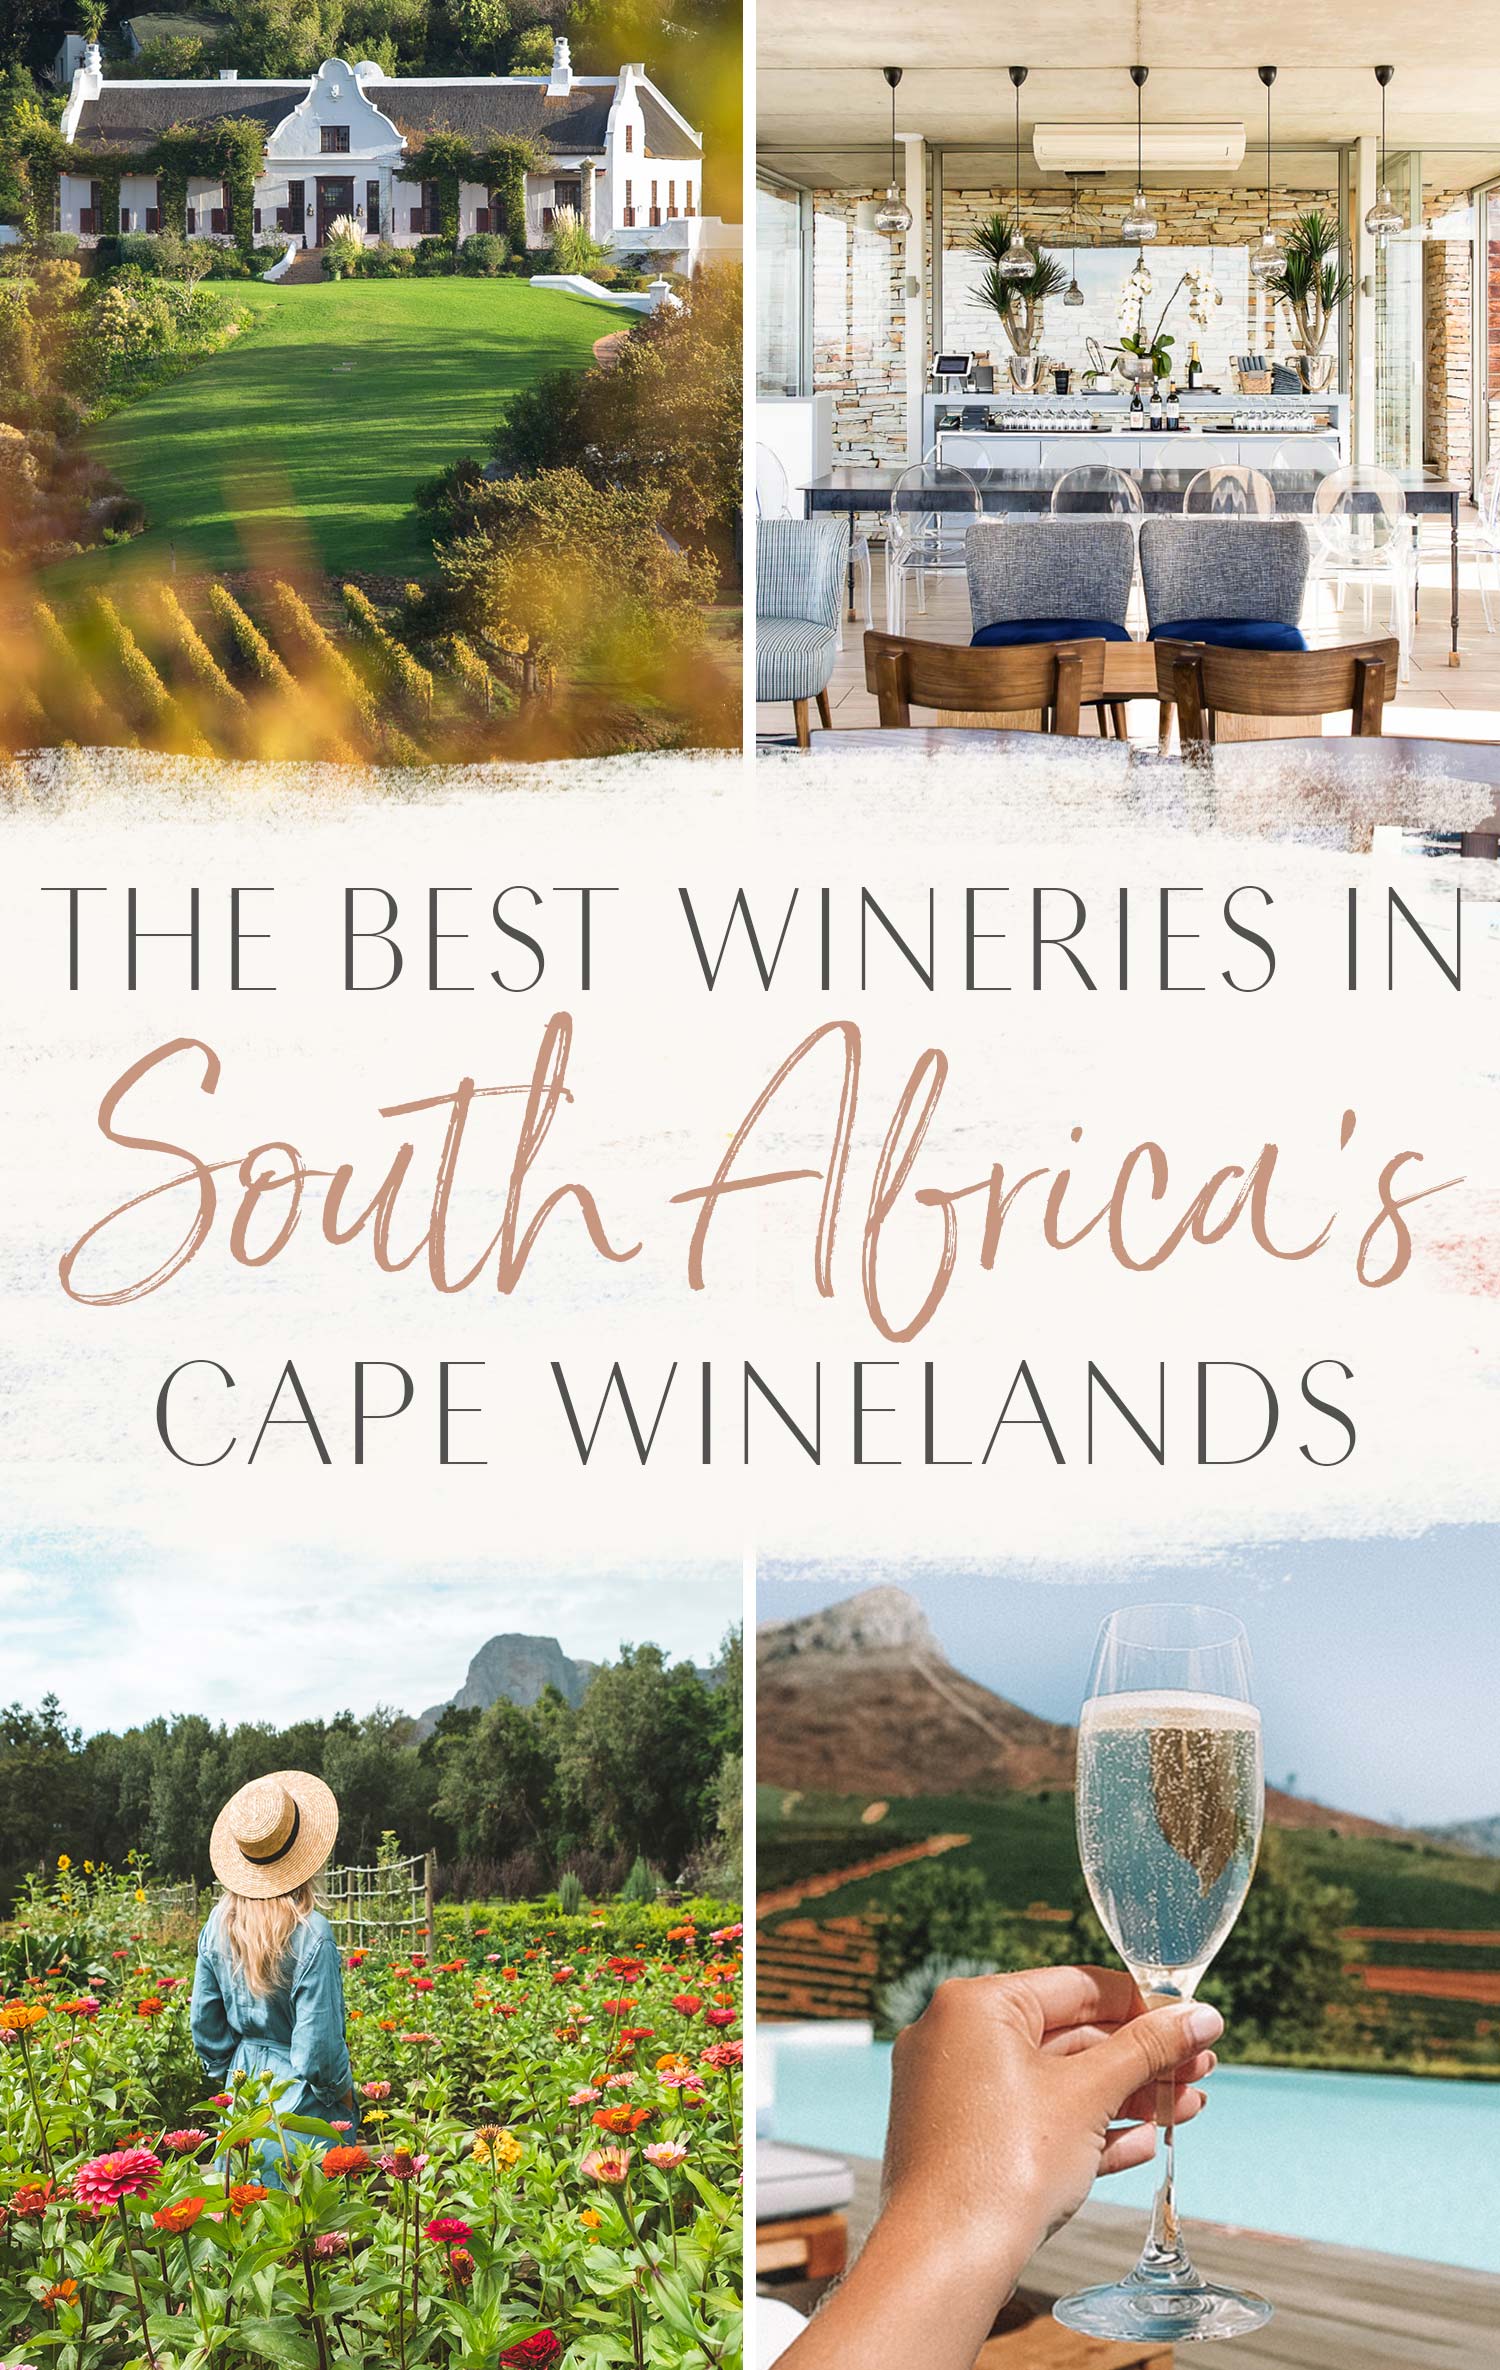 The Best Wineries in South Africa's Cape Winelands